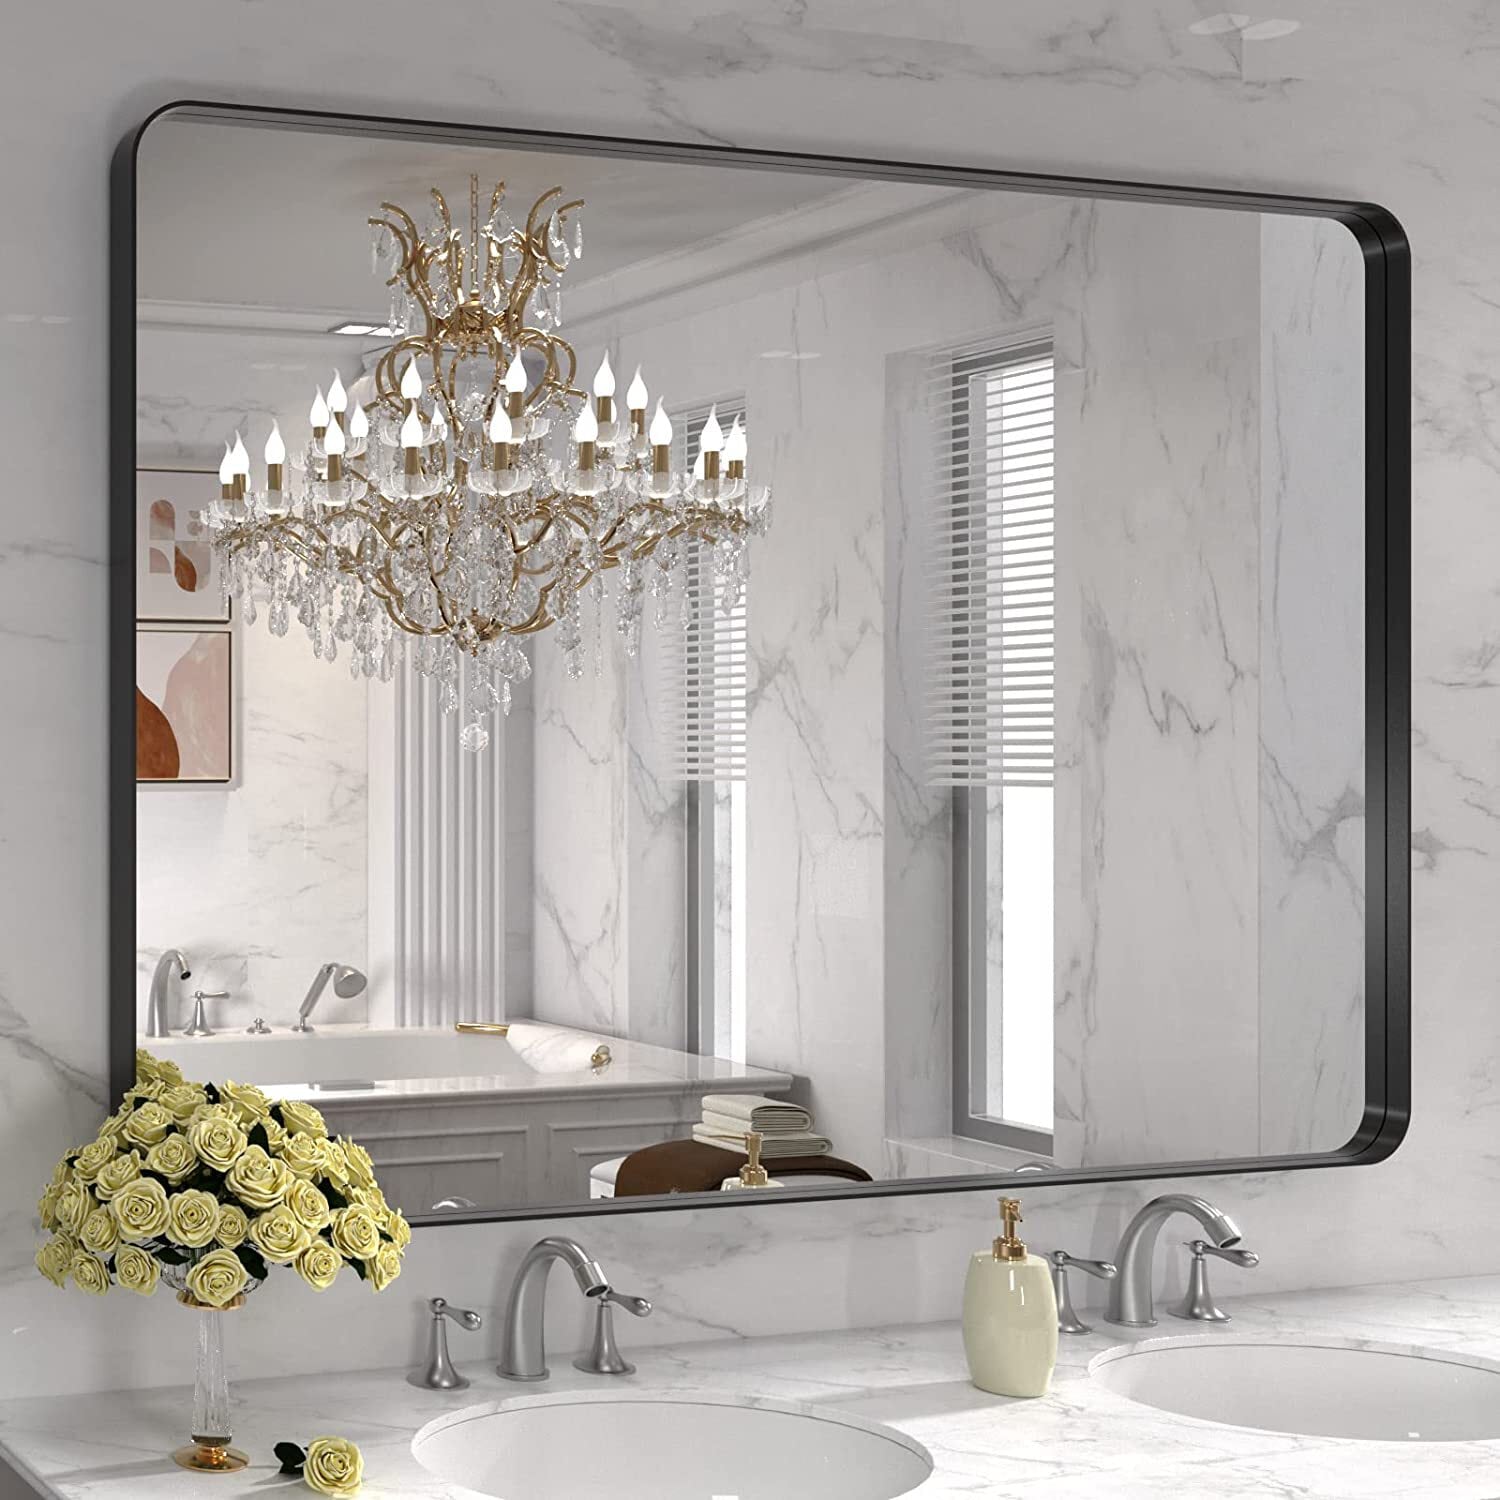 Black Bathroom Vanity Mirror for Ceiling, Ceiling Mirror | Decorative  Hanging Mirror for Wall Decor Rounded Rectangle Metal Framed Wall Mirror